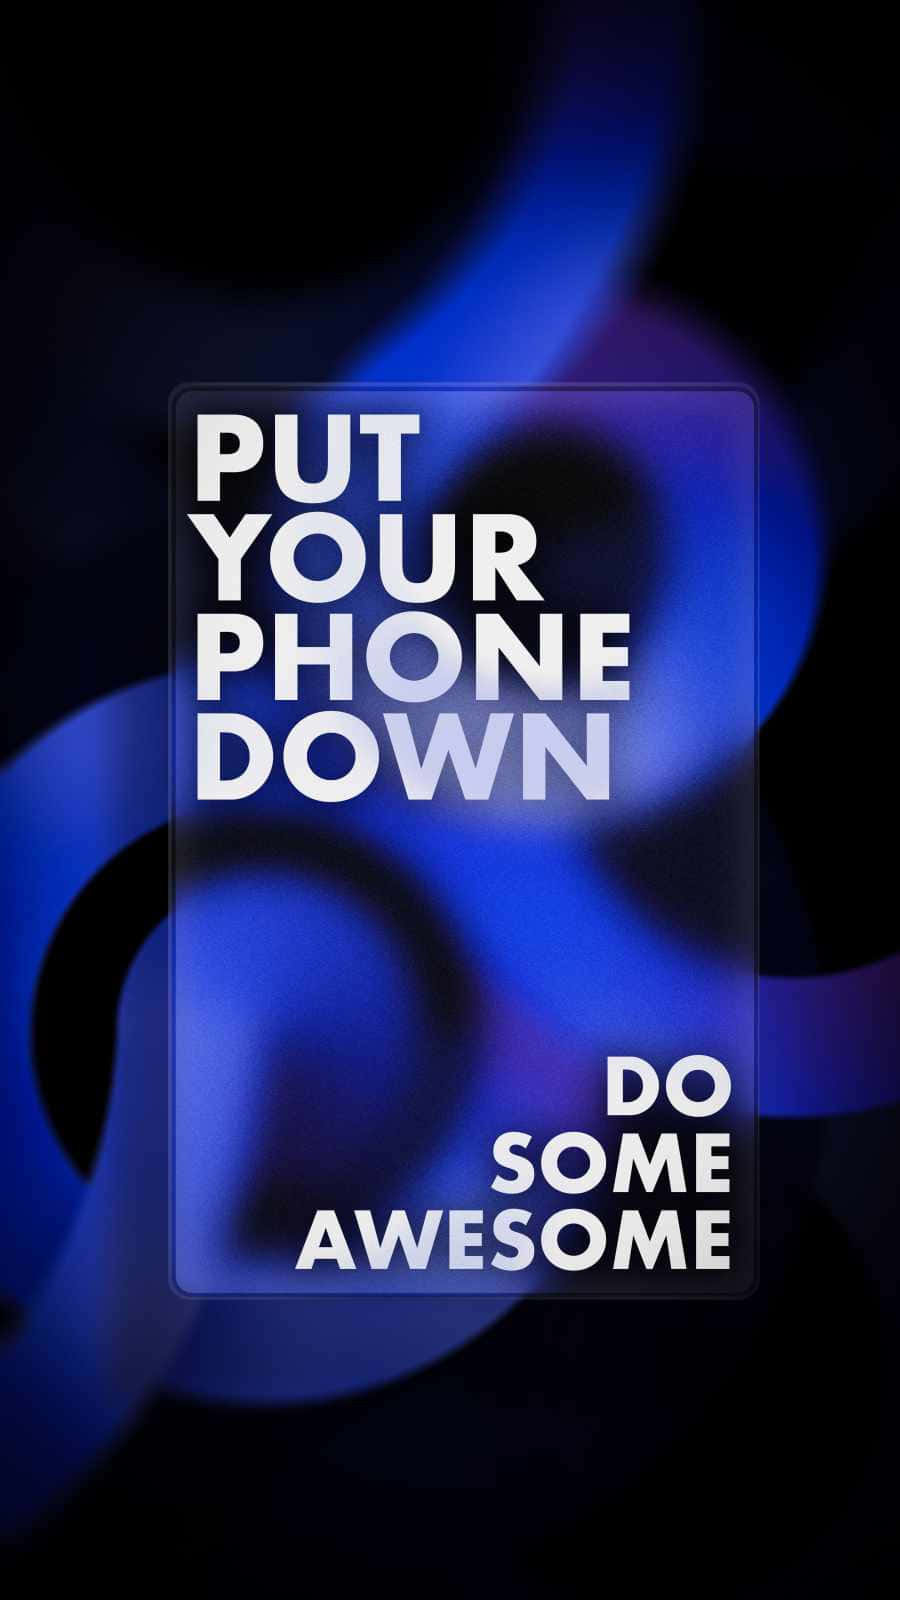 Put the phone down  Iphone wallpaper quotes funny Dont touch my phone  wallpapers Funny iphone wallpaper